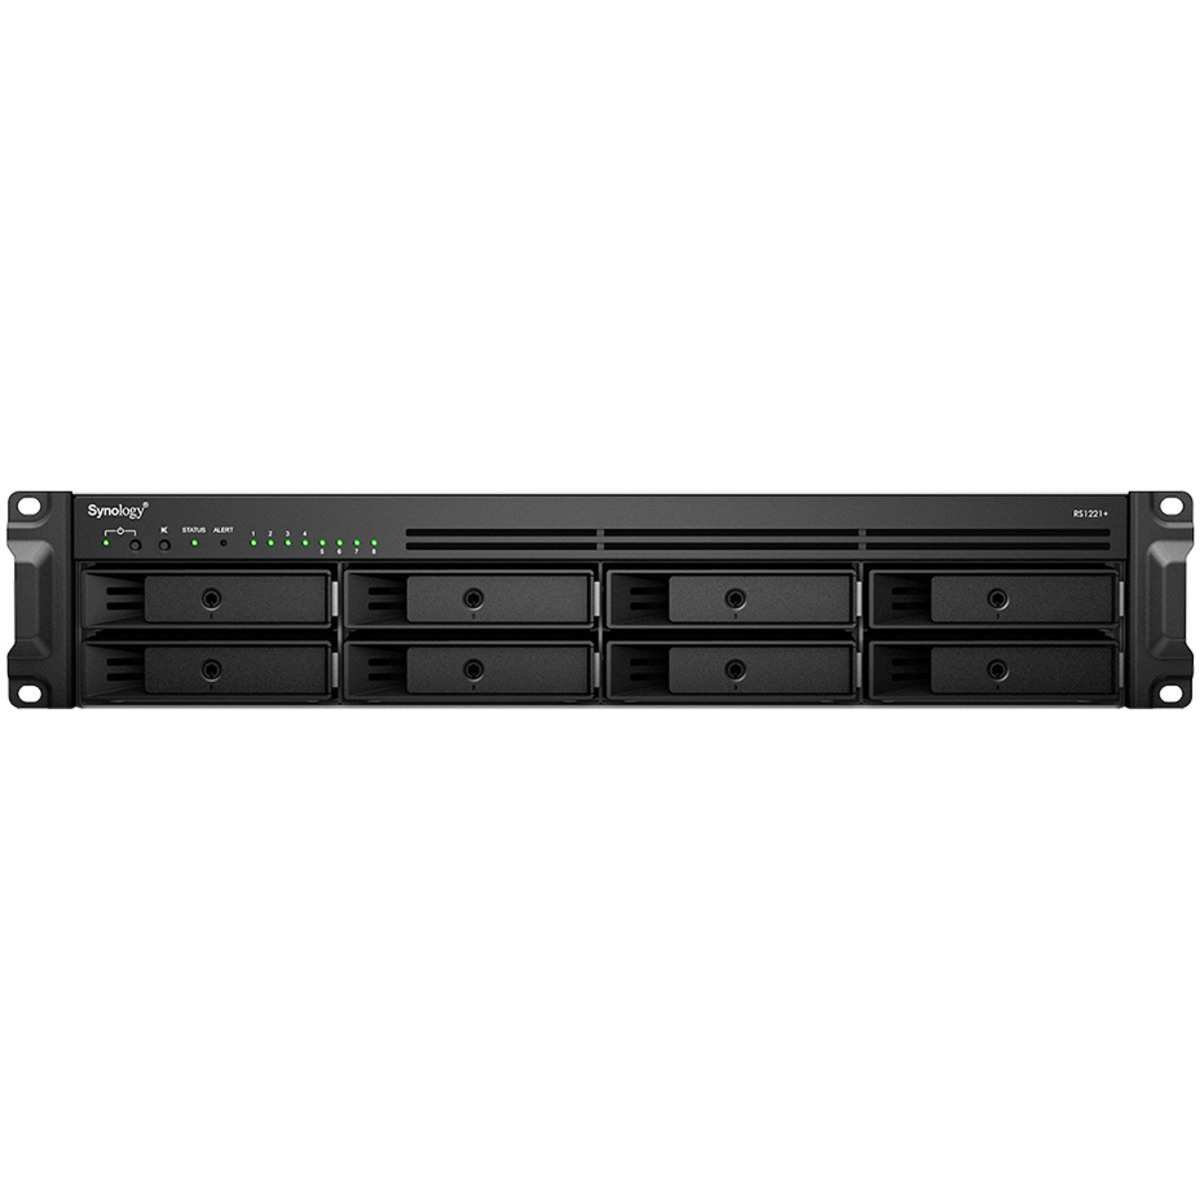 Synology RackStation RS1221RP+ 10tb 8-Bay RackMount Multimedia / Power User / Business NAS - Network Attached Storage Device 5x2tb Crucial MX500 CT2000MX500SSD1 2.5 560/510MB/s SATA 6Gb/s SSD CONSUMER Class Drives Installed - Burn-In Tested - FREE RAM UPGRADE RackStation RS1221RP+